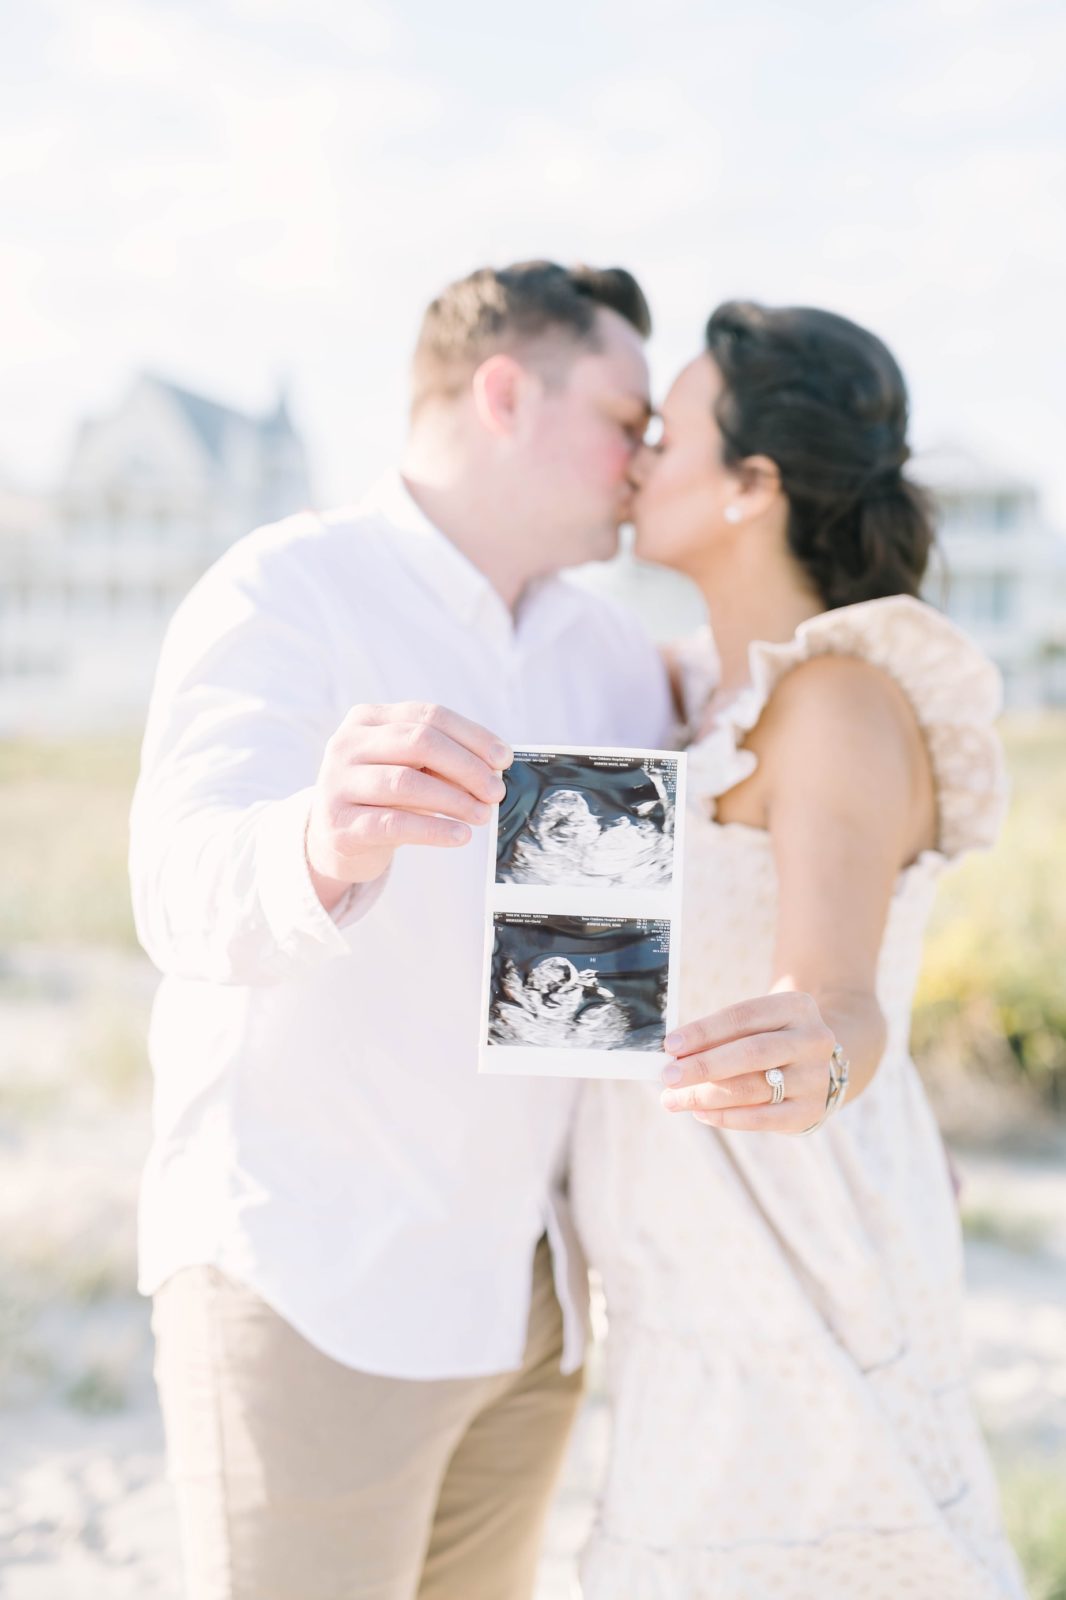 Couple kisses while holding an ultrasound picture by Christina Elliott Photography in the Galveston area. Galveston photographers ultrasound #ChristinaElliottPhotography #ChristinaElliottMaternity #Galvestonmaternityphotographers #maternityportraits